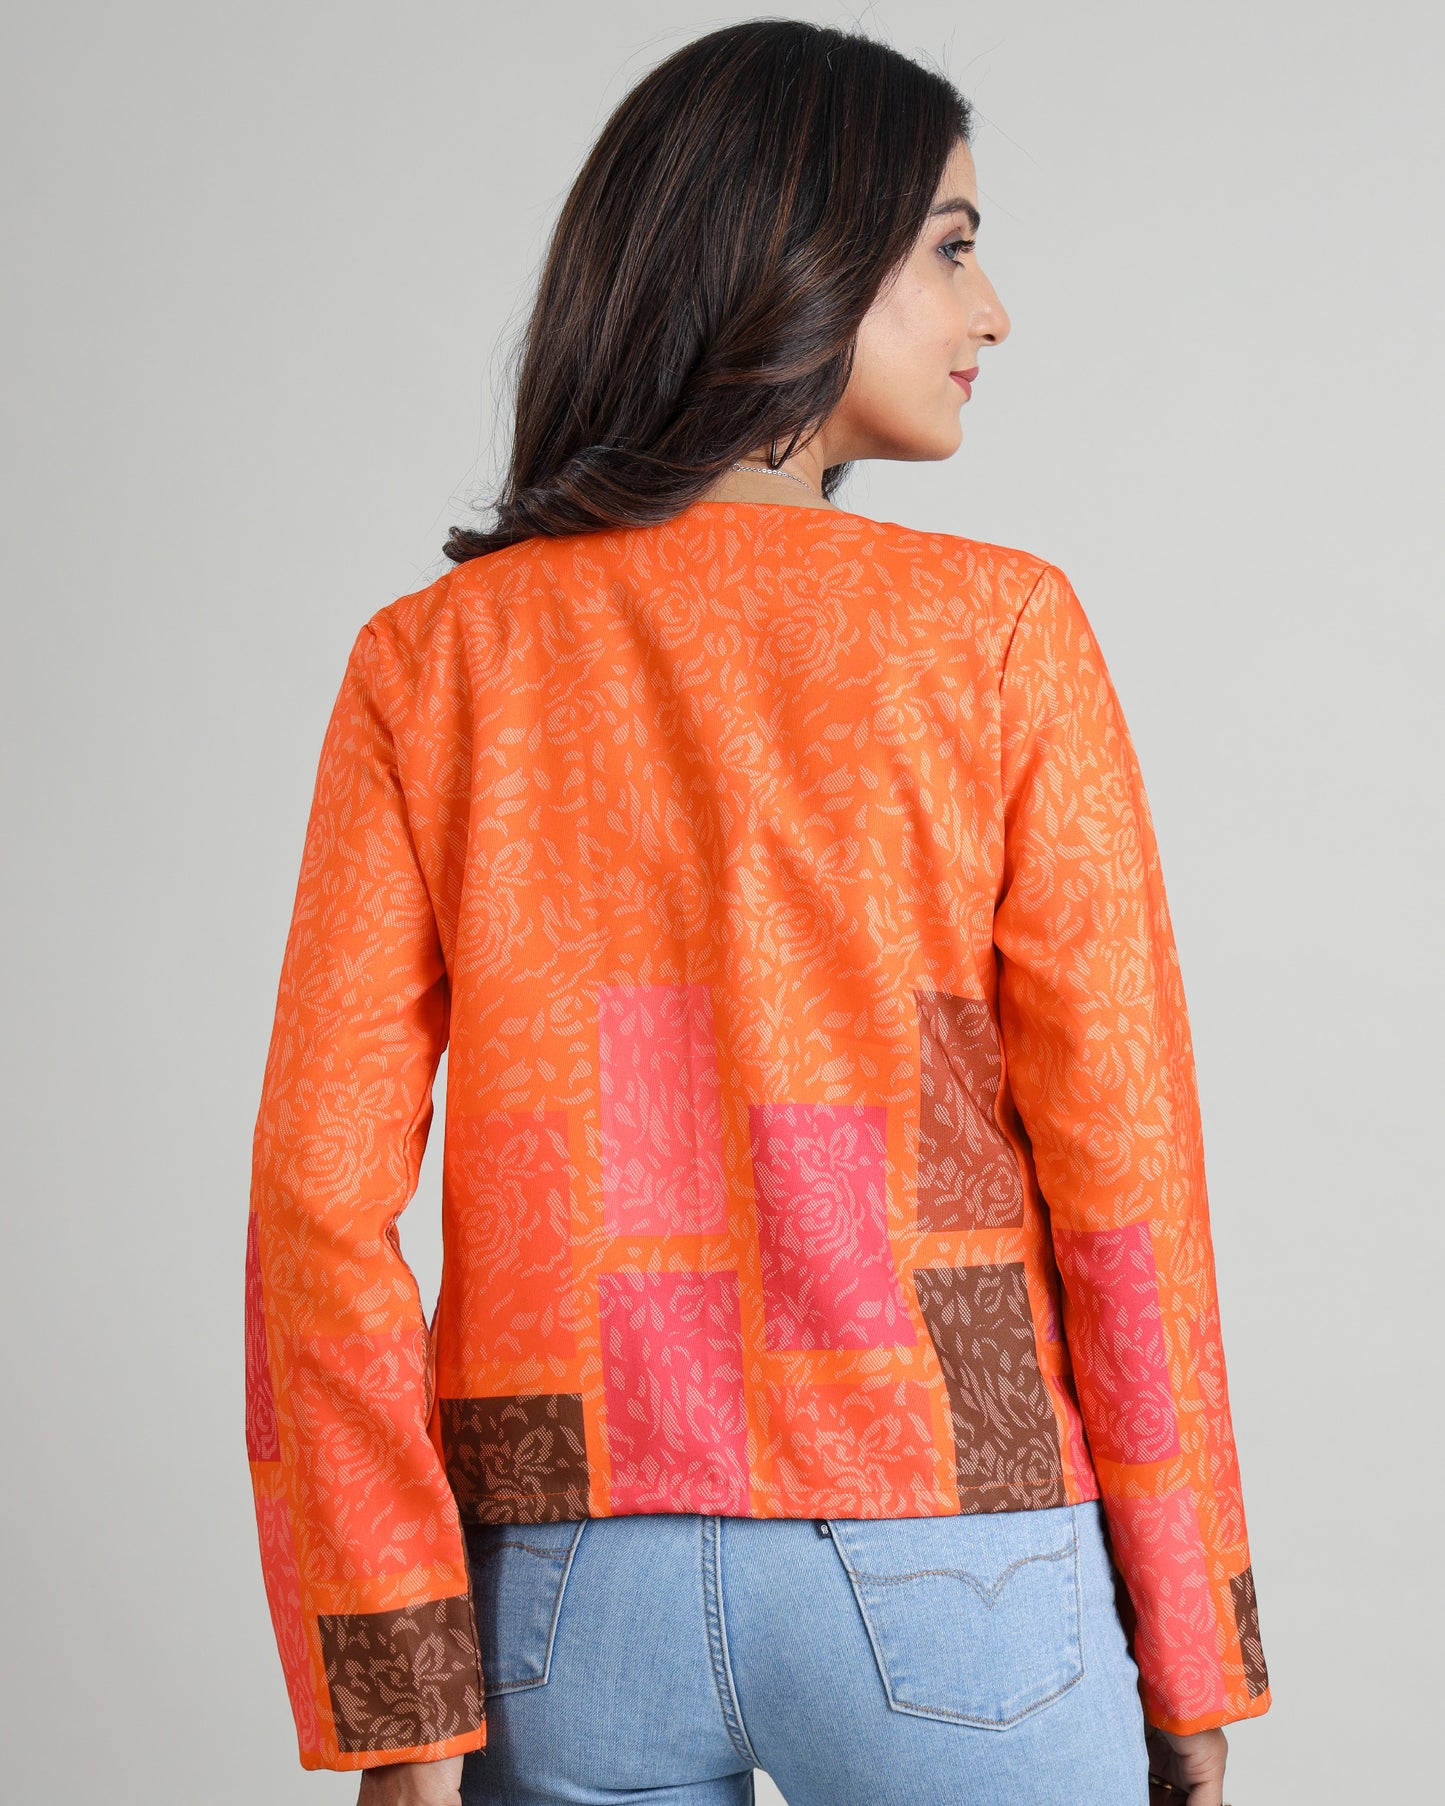 Flora's Fire: A Trendy Jacket That Makes a Statement